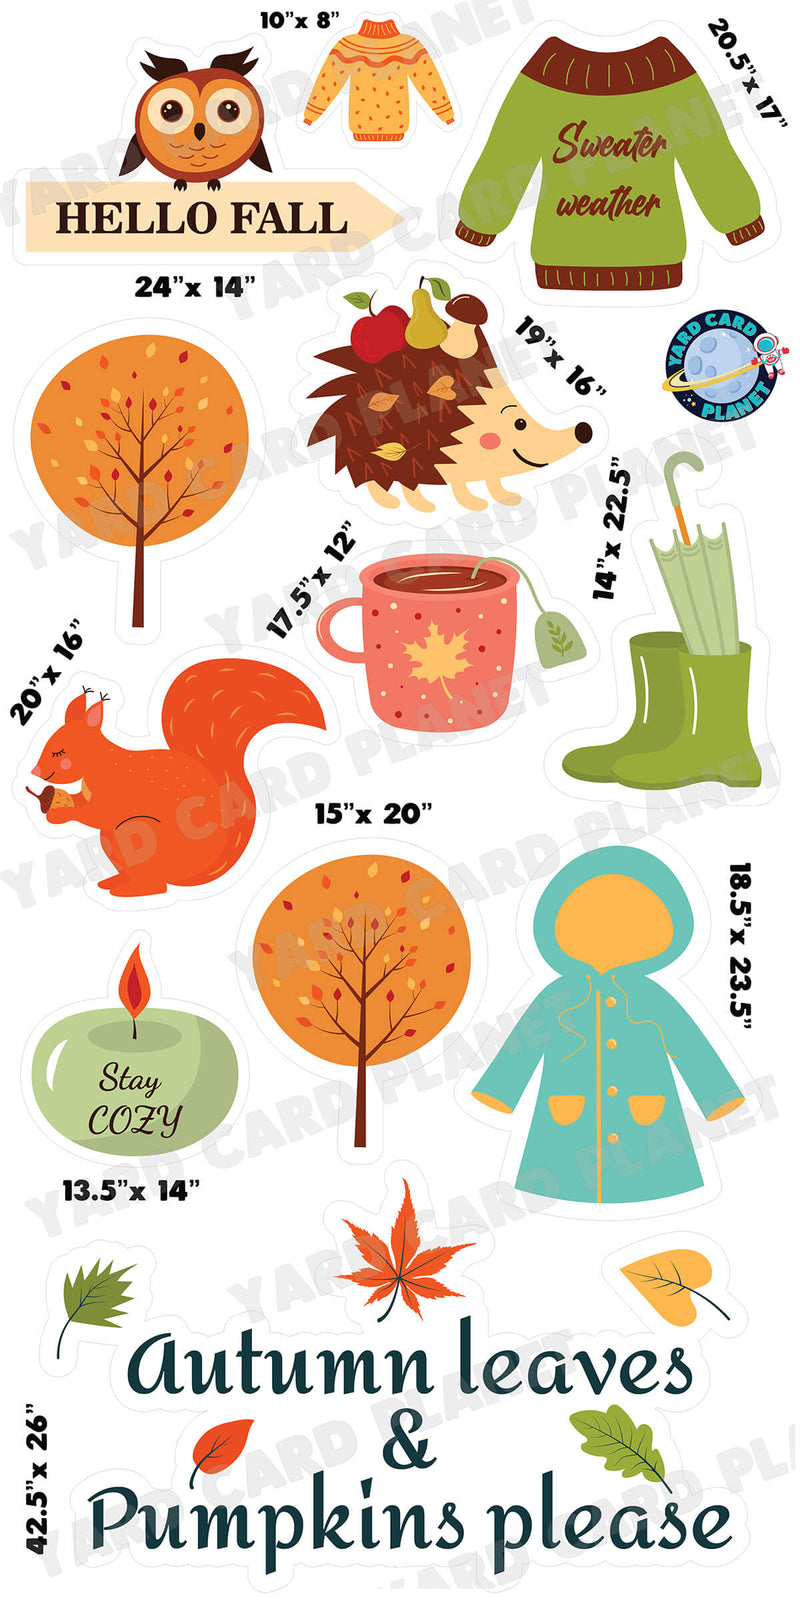 Hello Fall Sweater Weather EZ Quick Sign and Yard Card Flair Set with Measurements